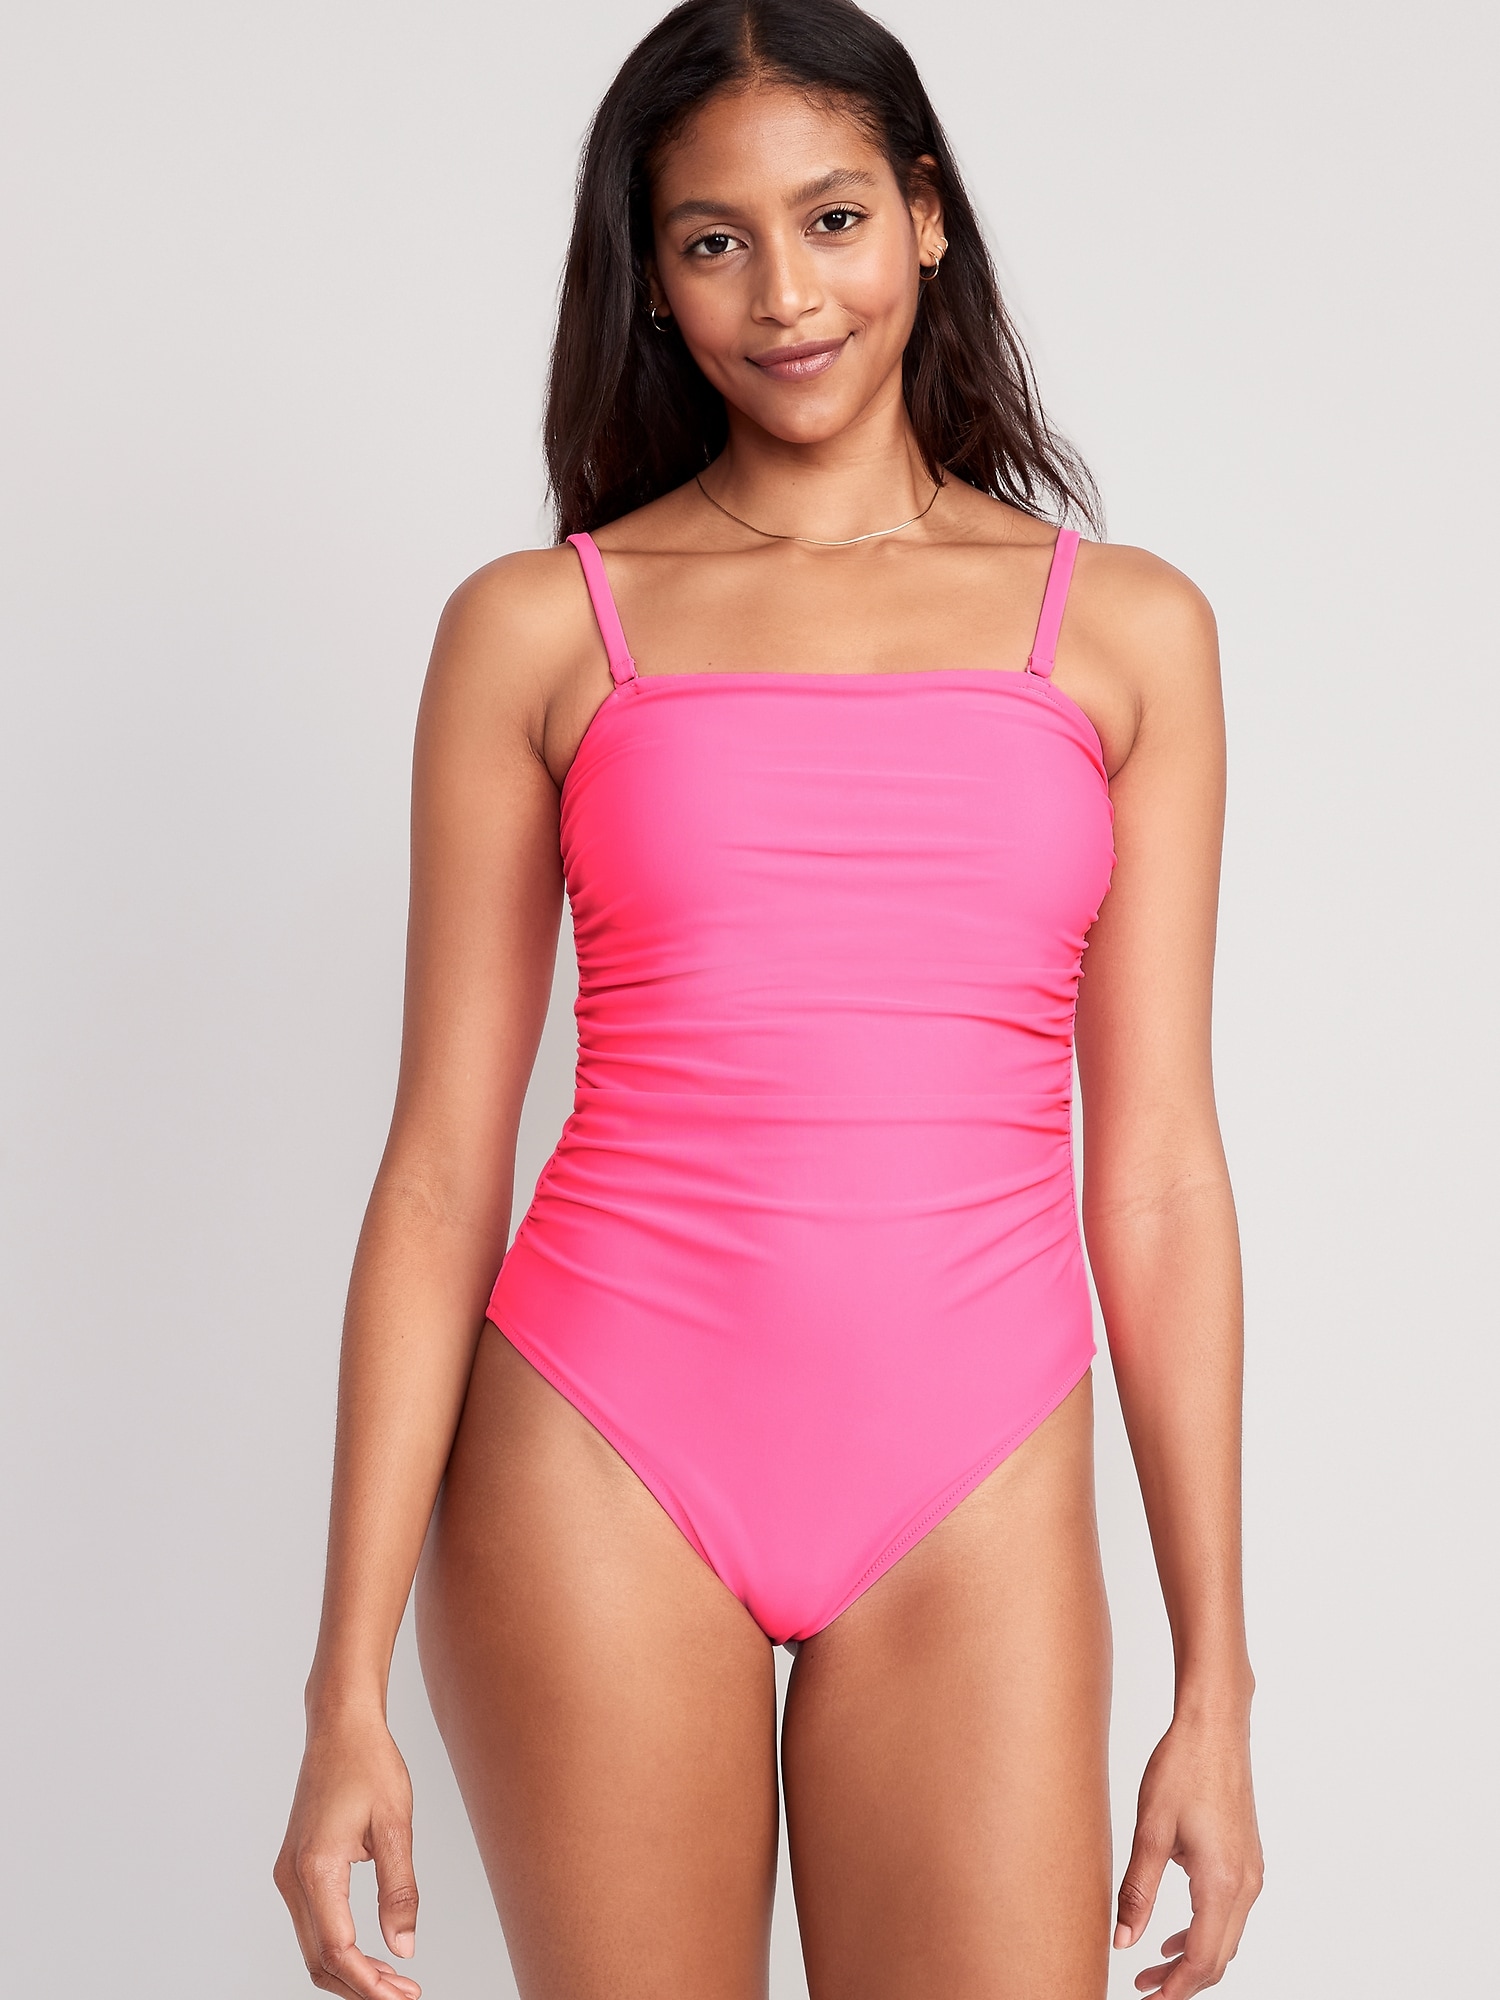 Old Navy Convertible Bandeau One-Piece Swimsuit for Women pink. 1